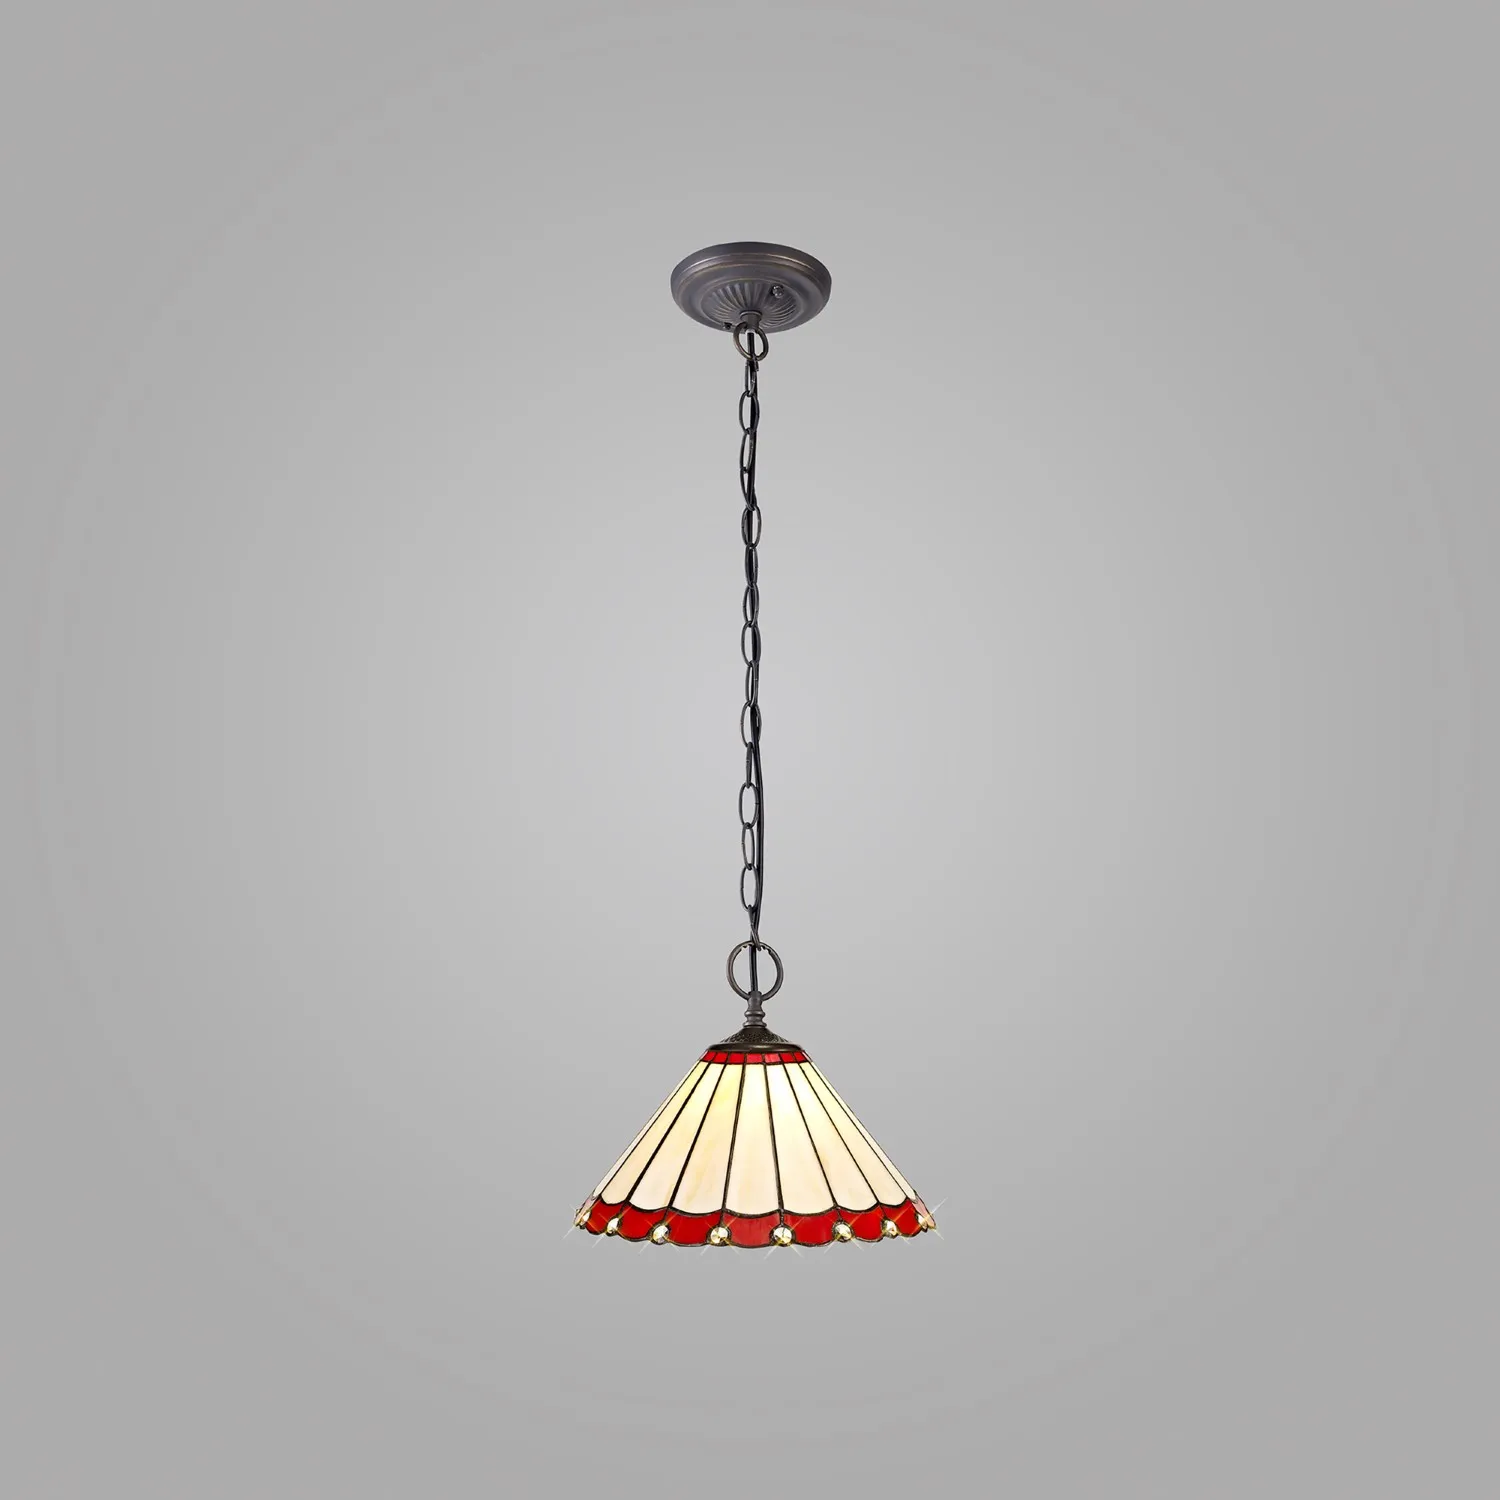 Ware 2 Light Downlighter Pendant E27 With 30cm Tiffany Shade, Red Cream Crystal Aged Antique Brass